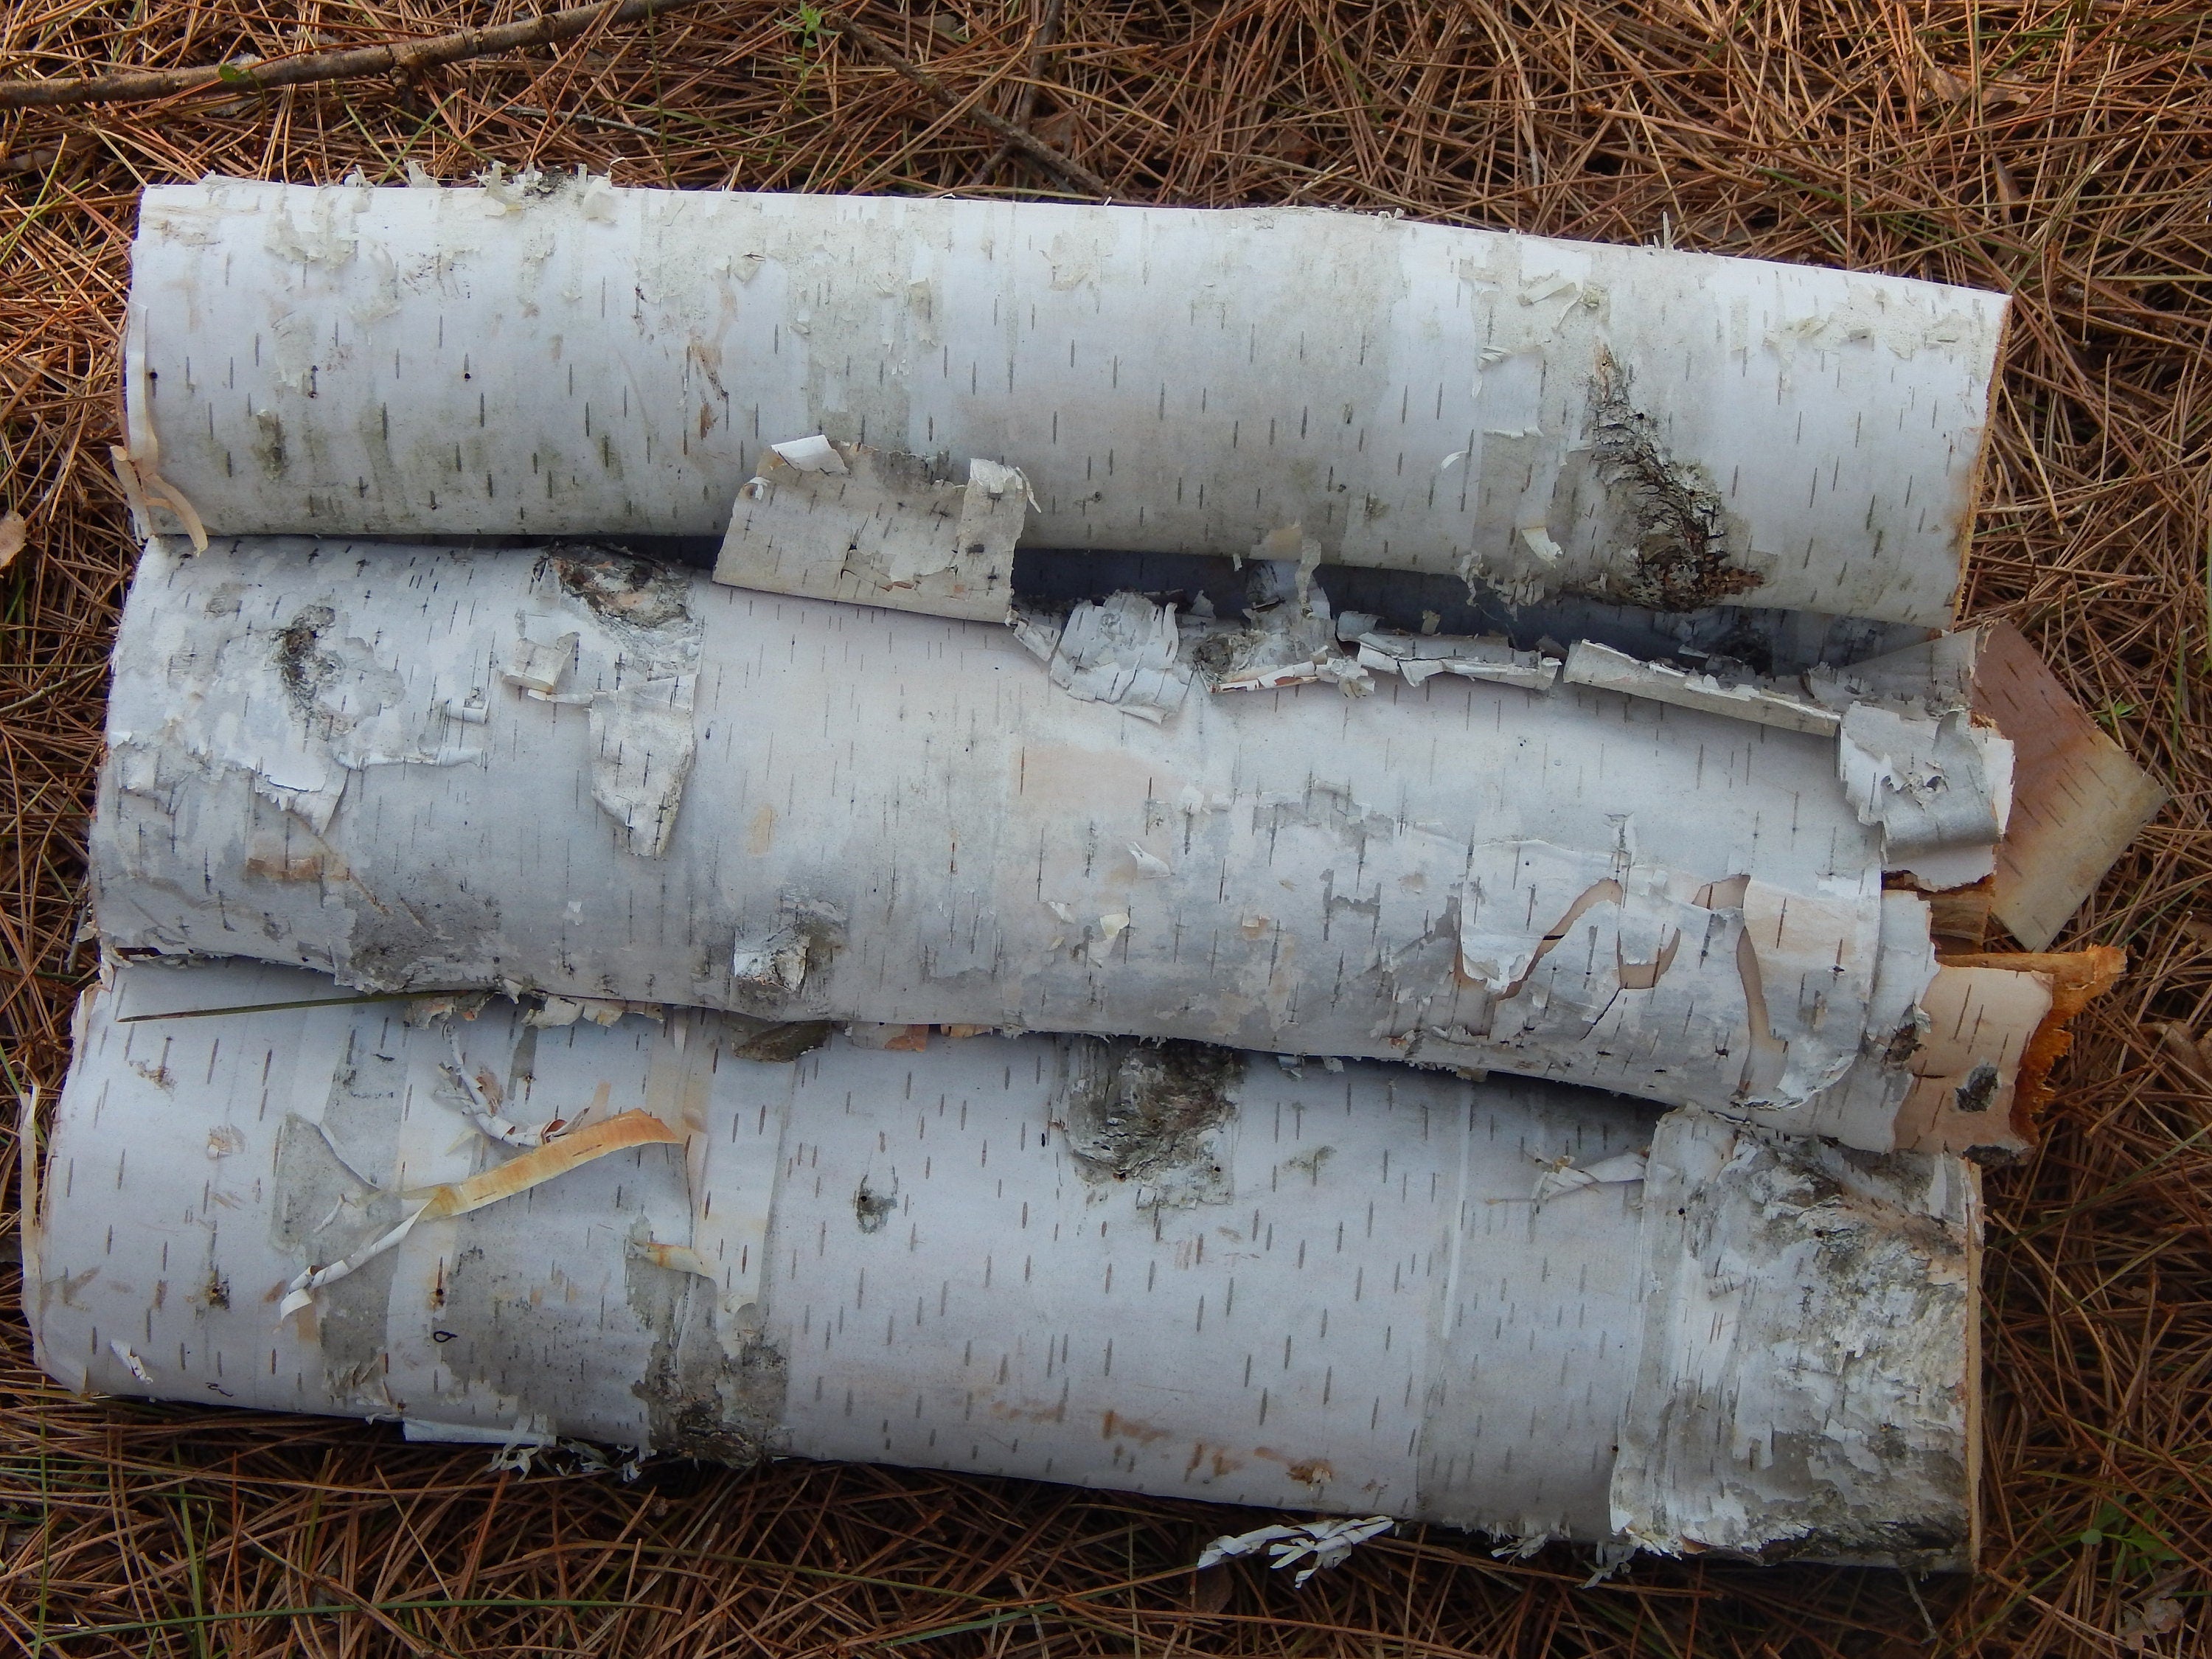 White Birch logs, 6 count, 12 inches long and between 3 & 4 inches in diameter